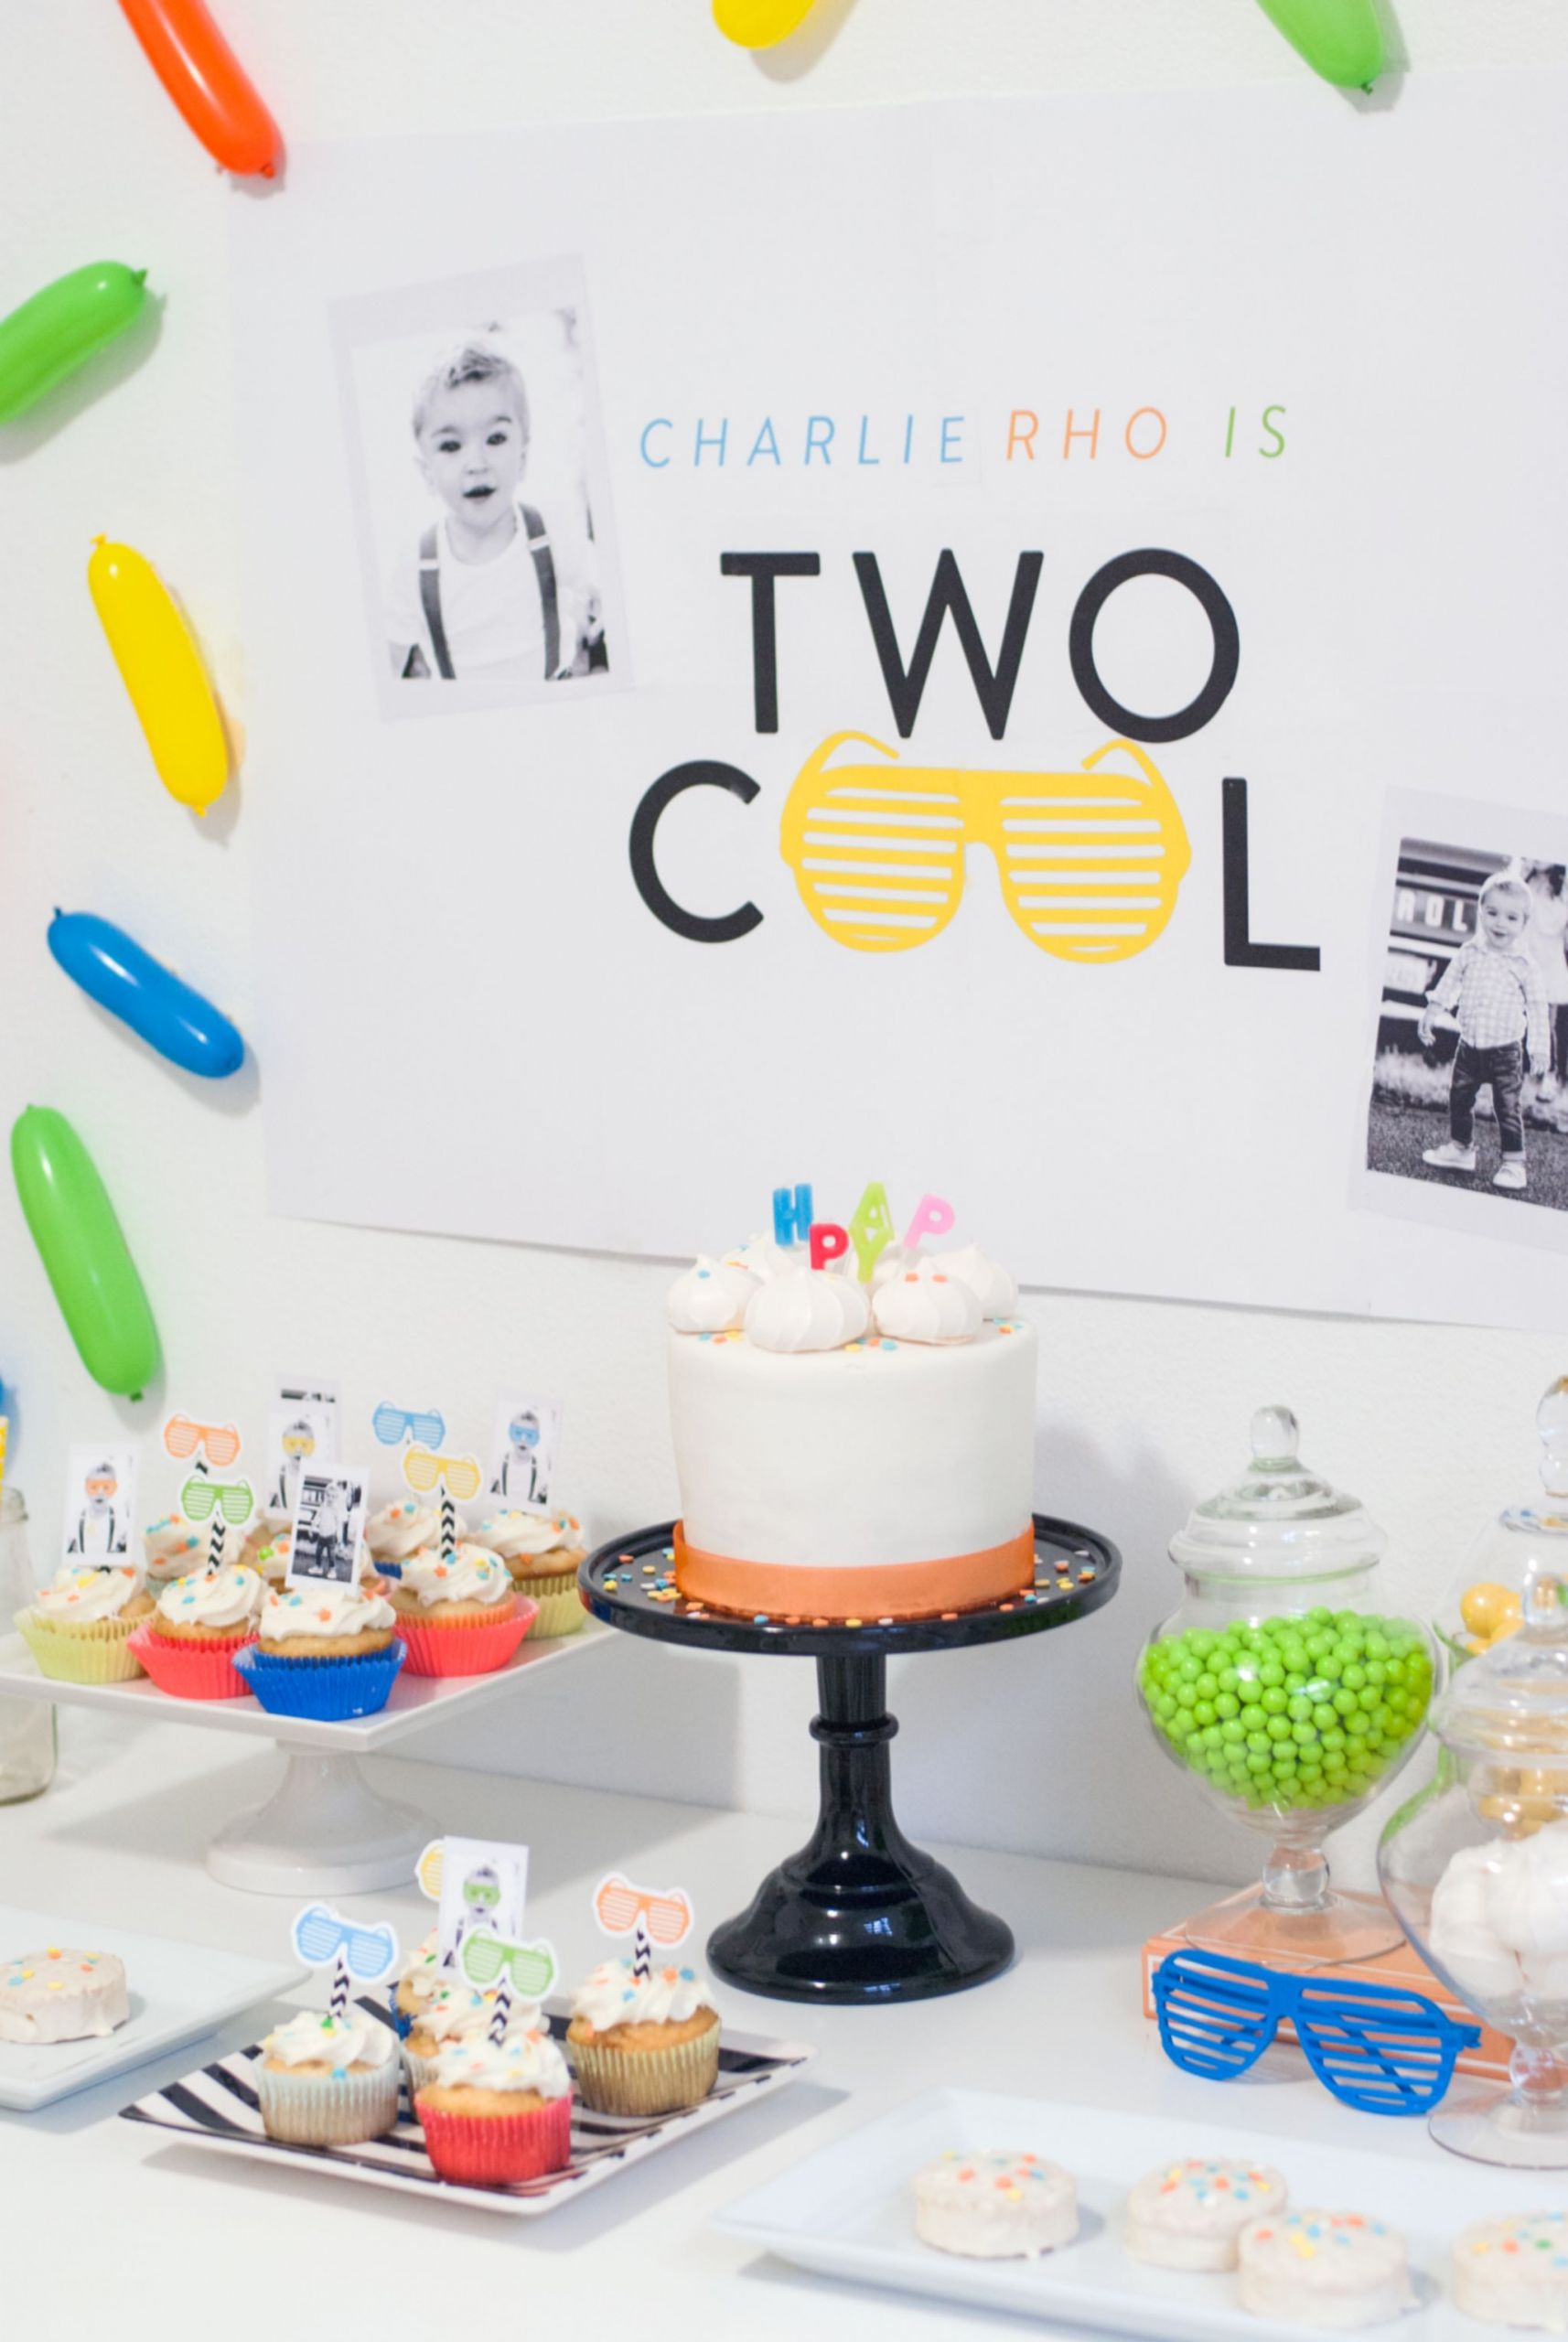 2Nd Birthday Party Ideas For Boys
 A Two Cool Birthday Party That ll Have You Reaching for